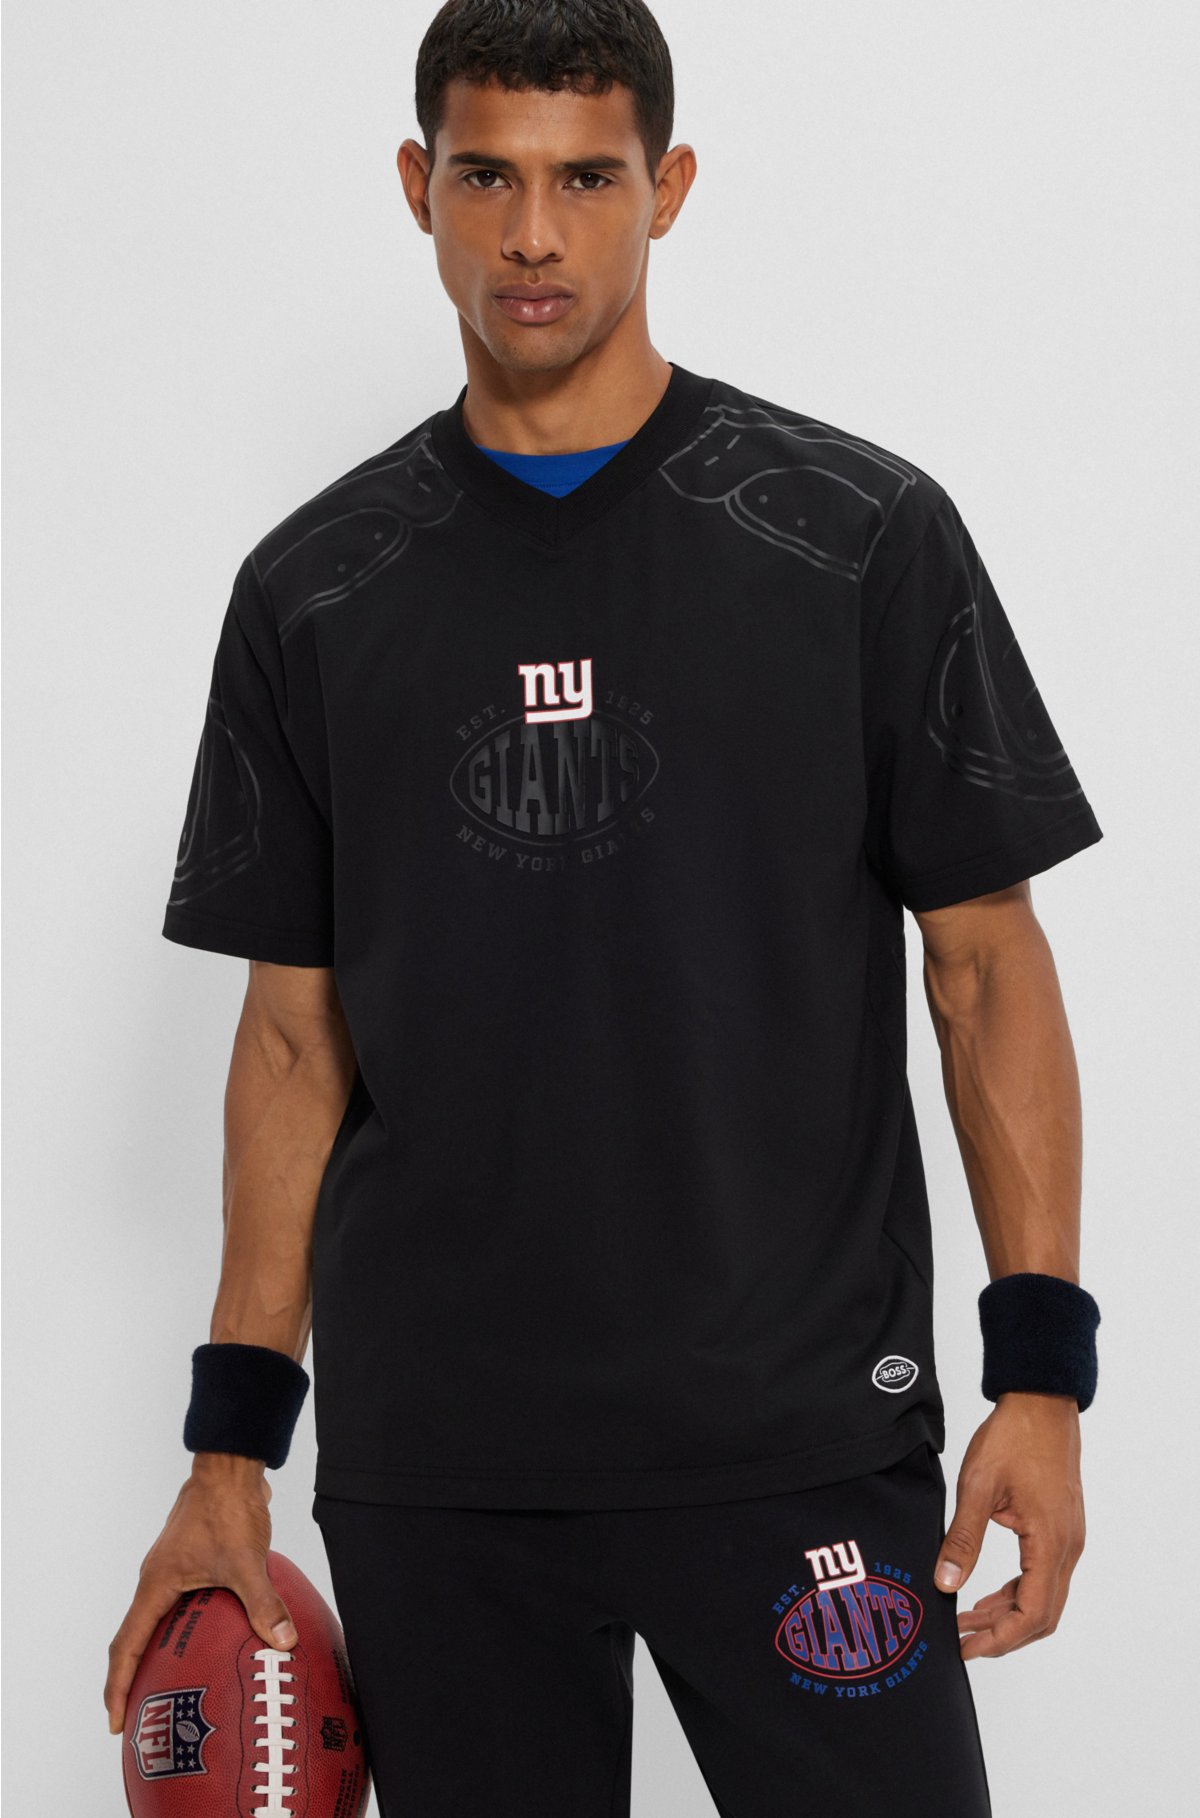 BOSS x NFL oversize-fit T-shirt with collaborative branding, Giants